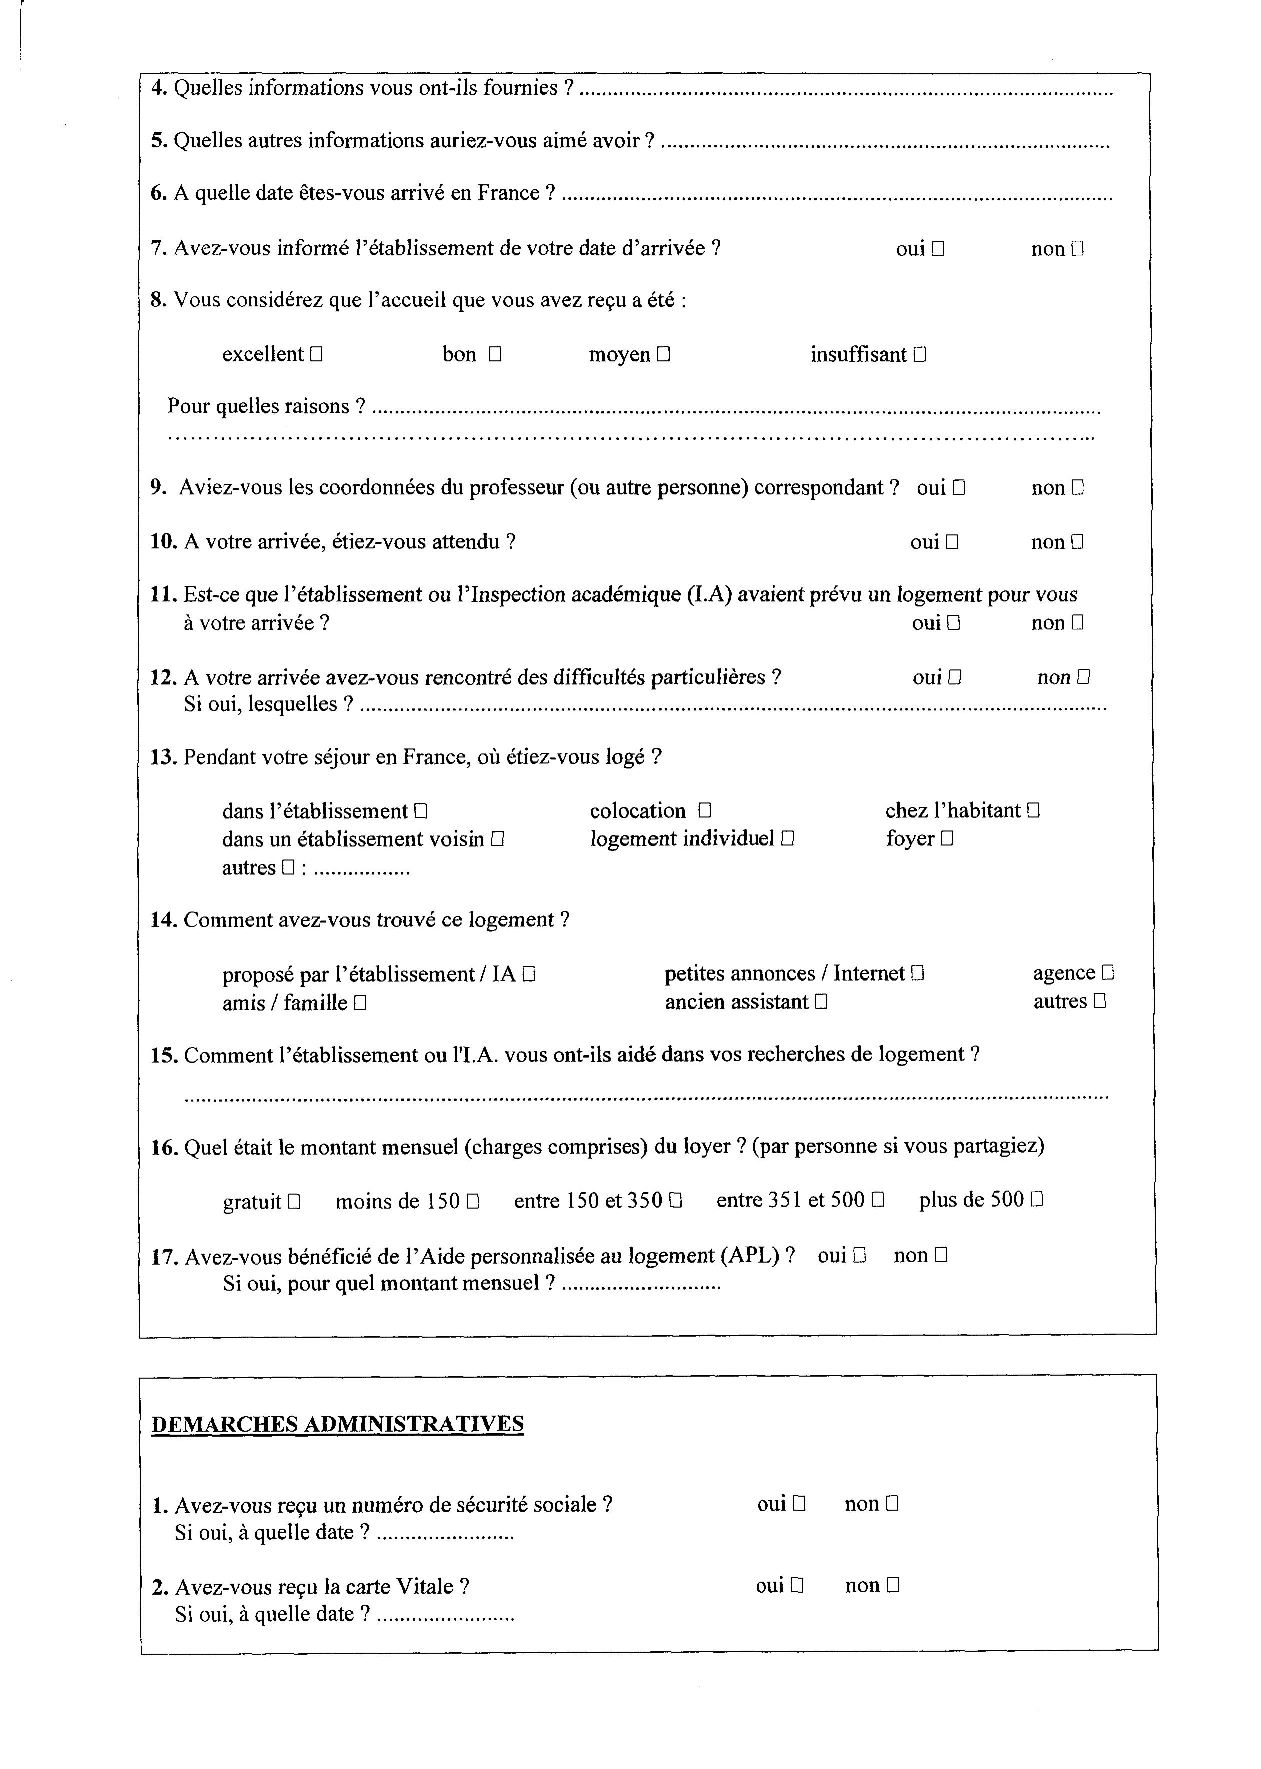 How To Fill Out A Resume Compterendurectorat2 how to fill out a resume|wikiresume.com